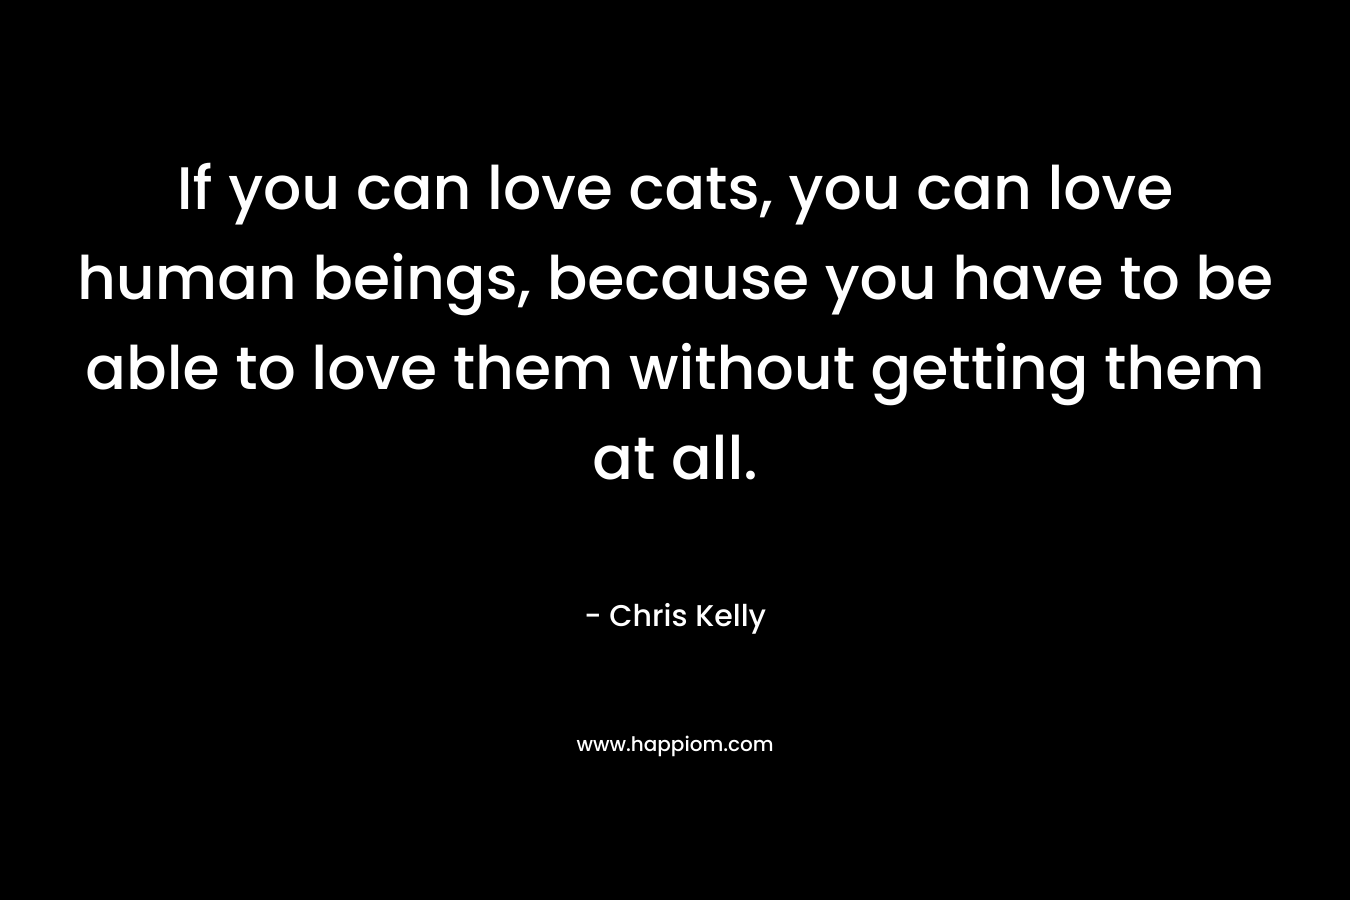 If you can love cats, you can love human beings, because you have to be able to love them without getting them at all. – Chris Kelly